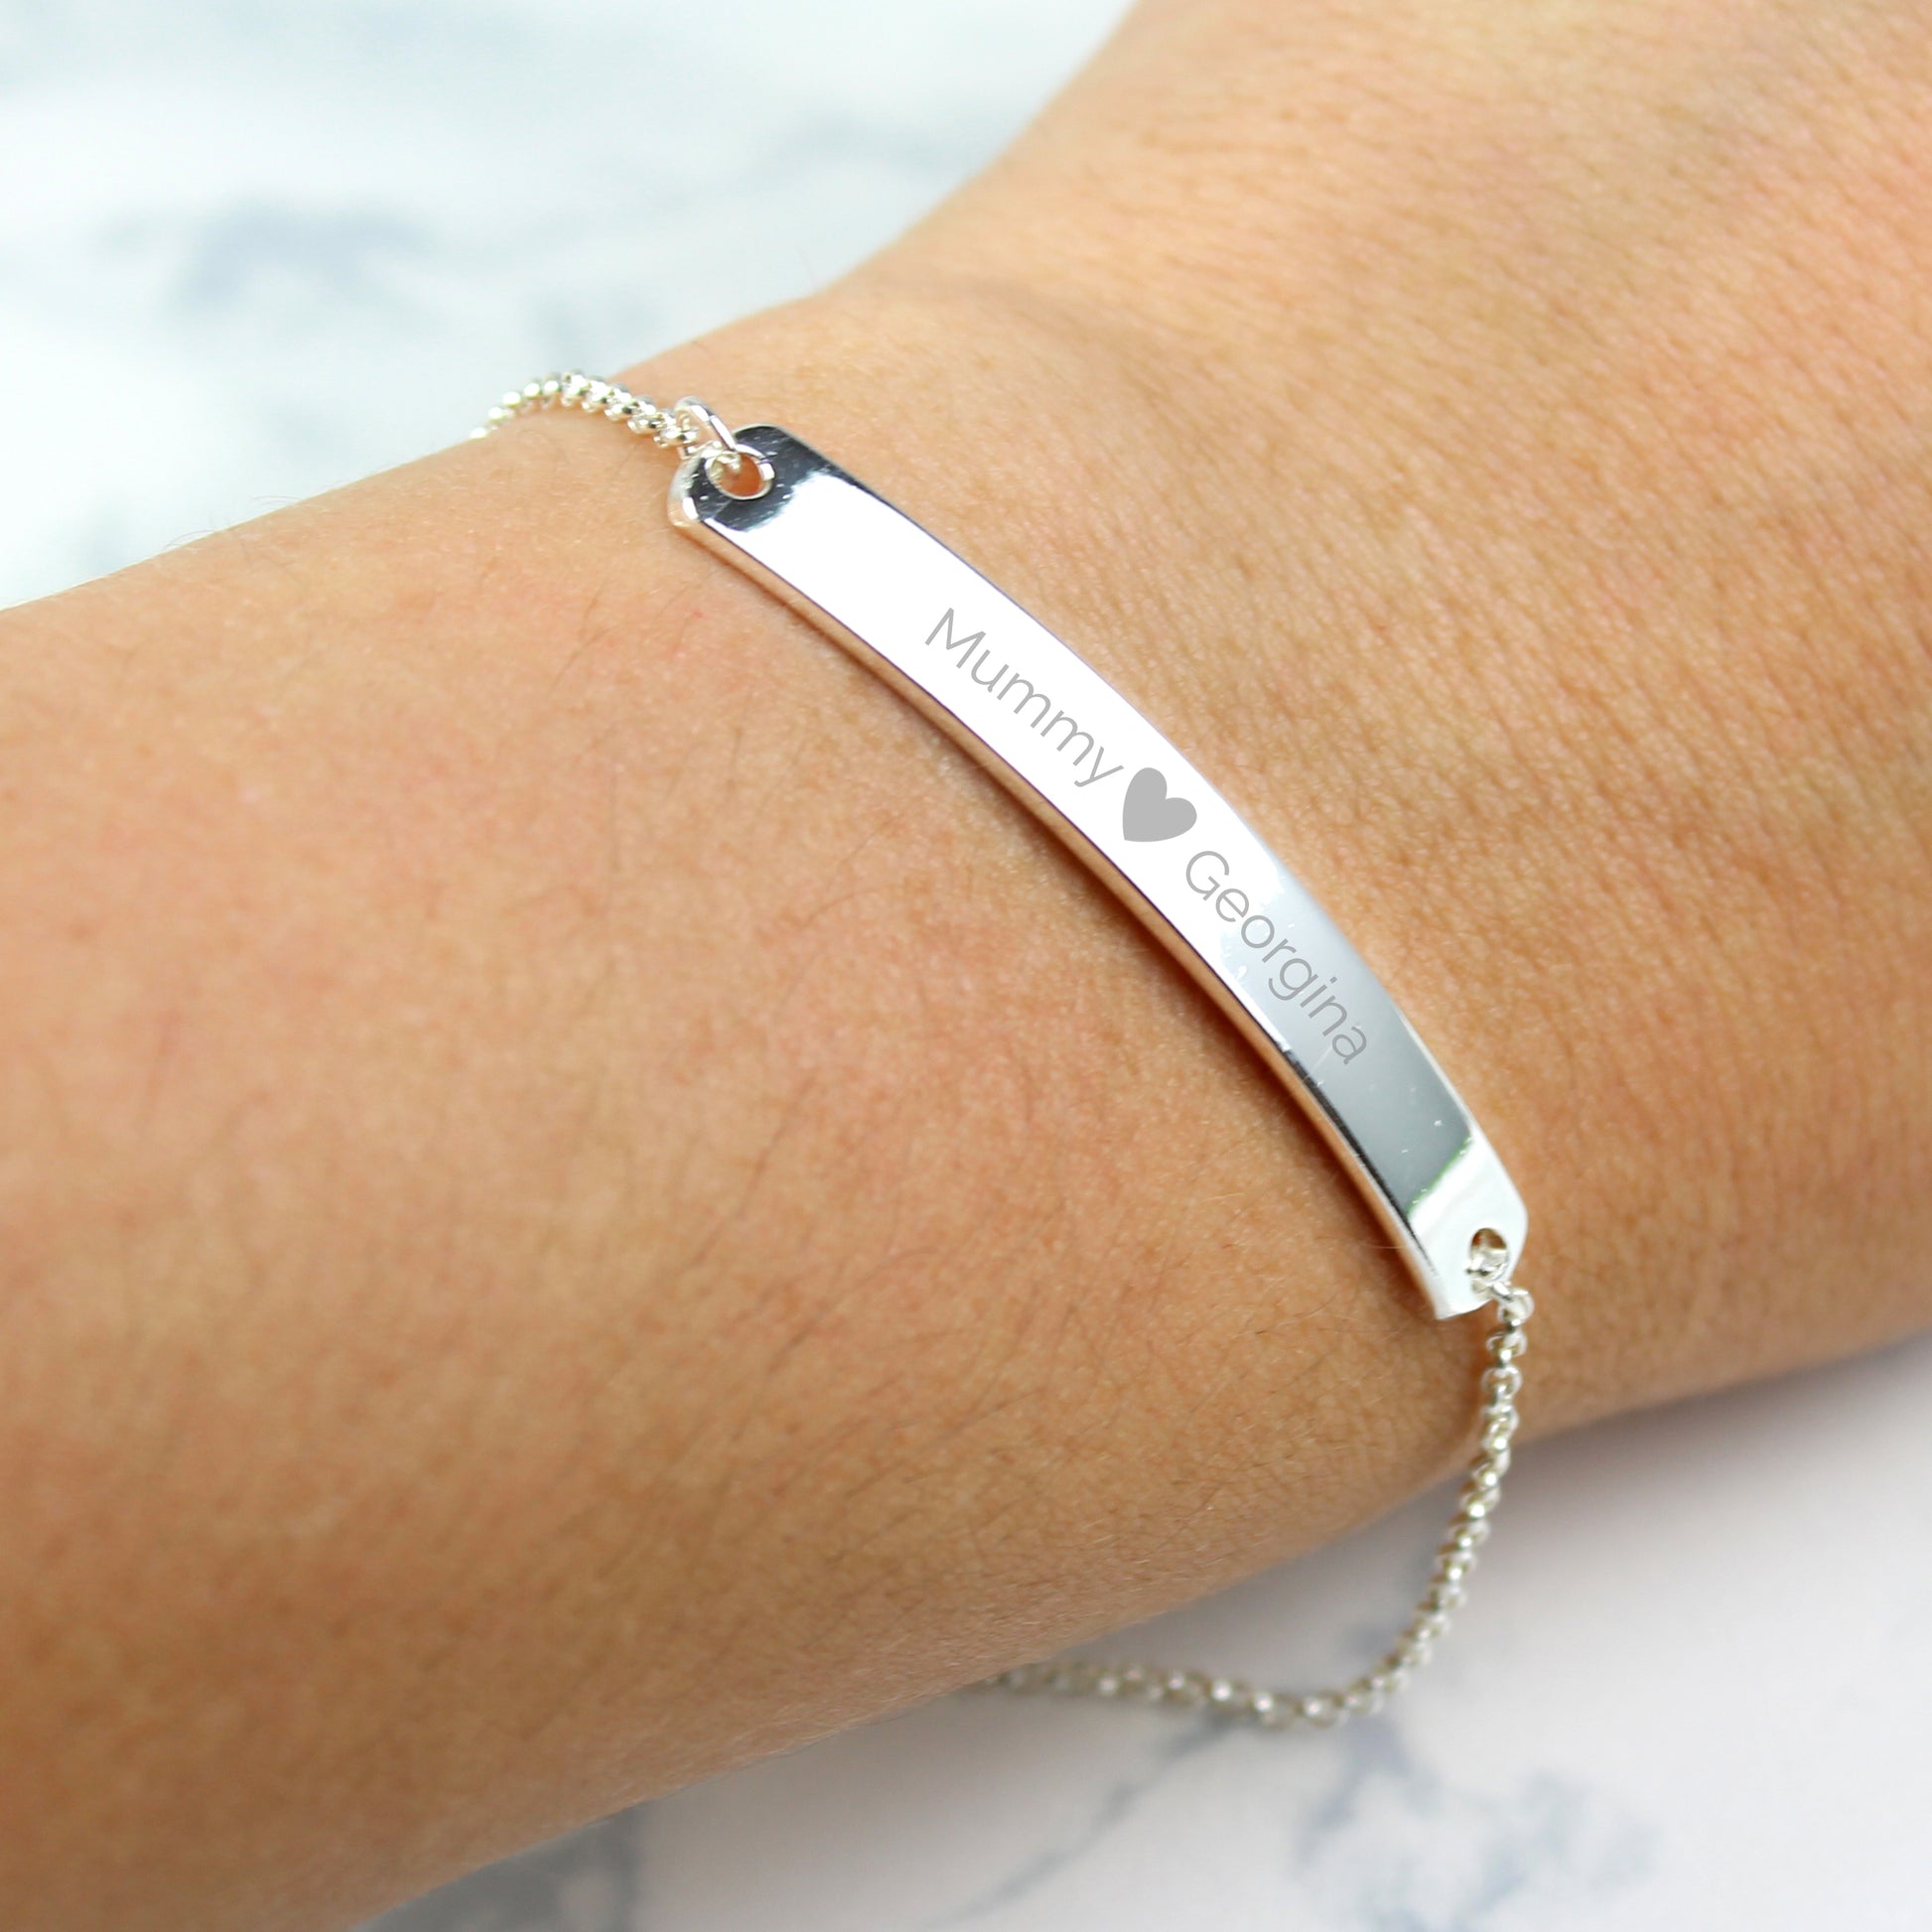 Silver colour bracelet shown with two personalised names etched on to front bar and separated by a small etched heart. Not just couples, this one shows the names of a mother and daughter.